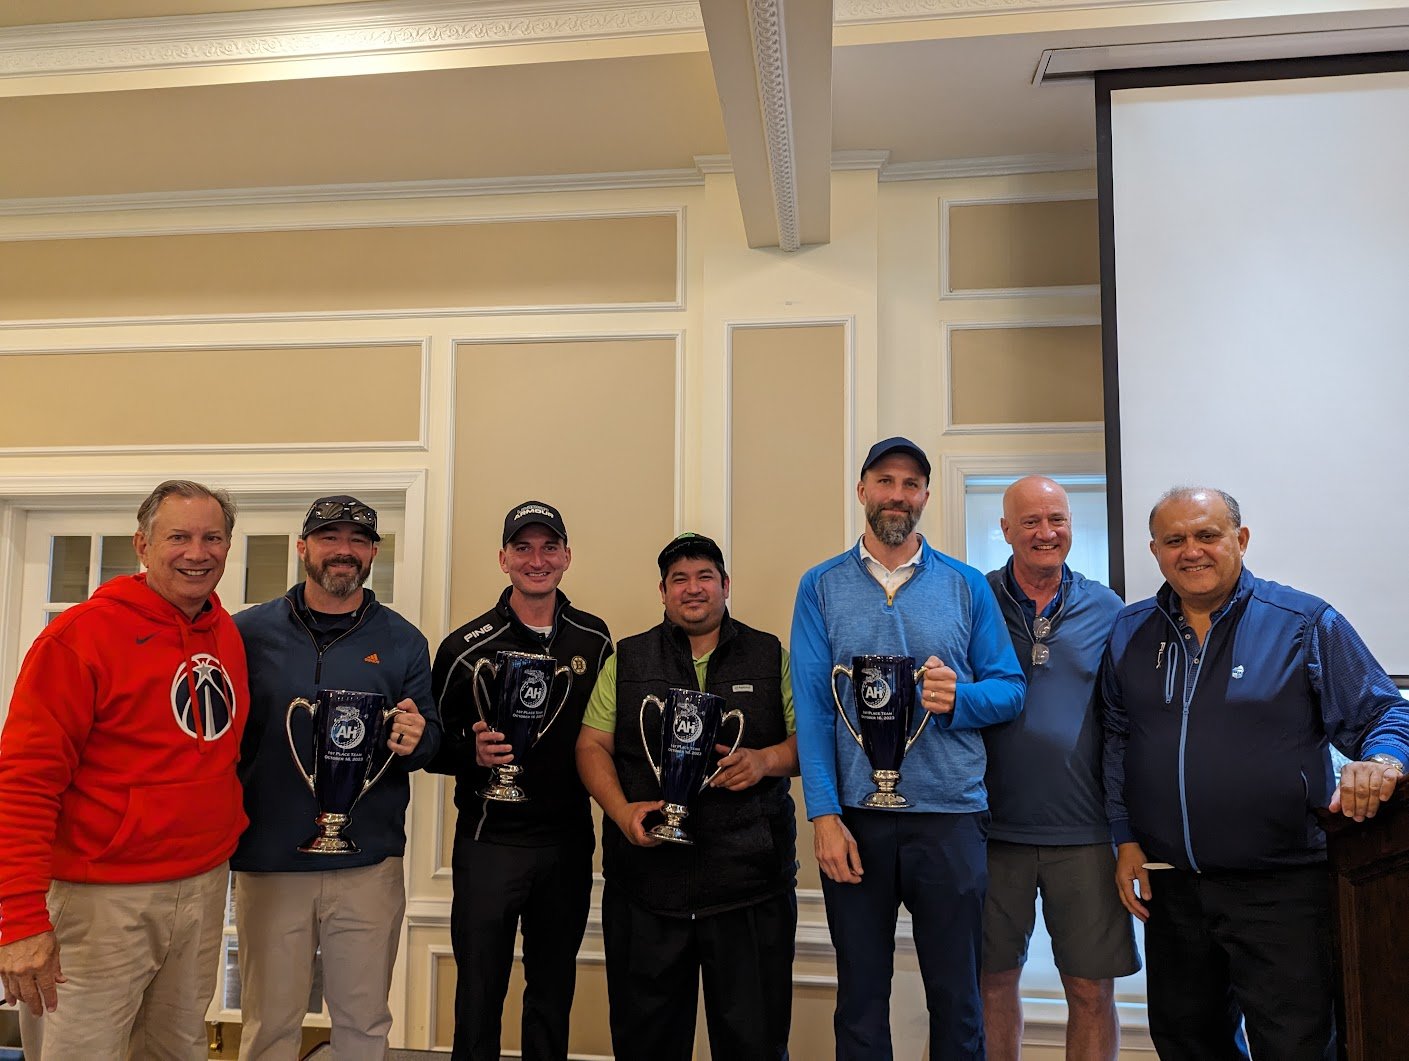  First place team being presented their trophies: Peter Marketos, Leif Ackerman, Marcus Malone, and Gustavo Leal.  